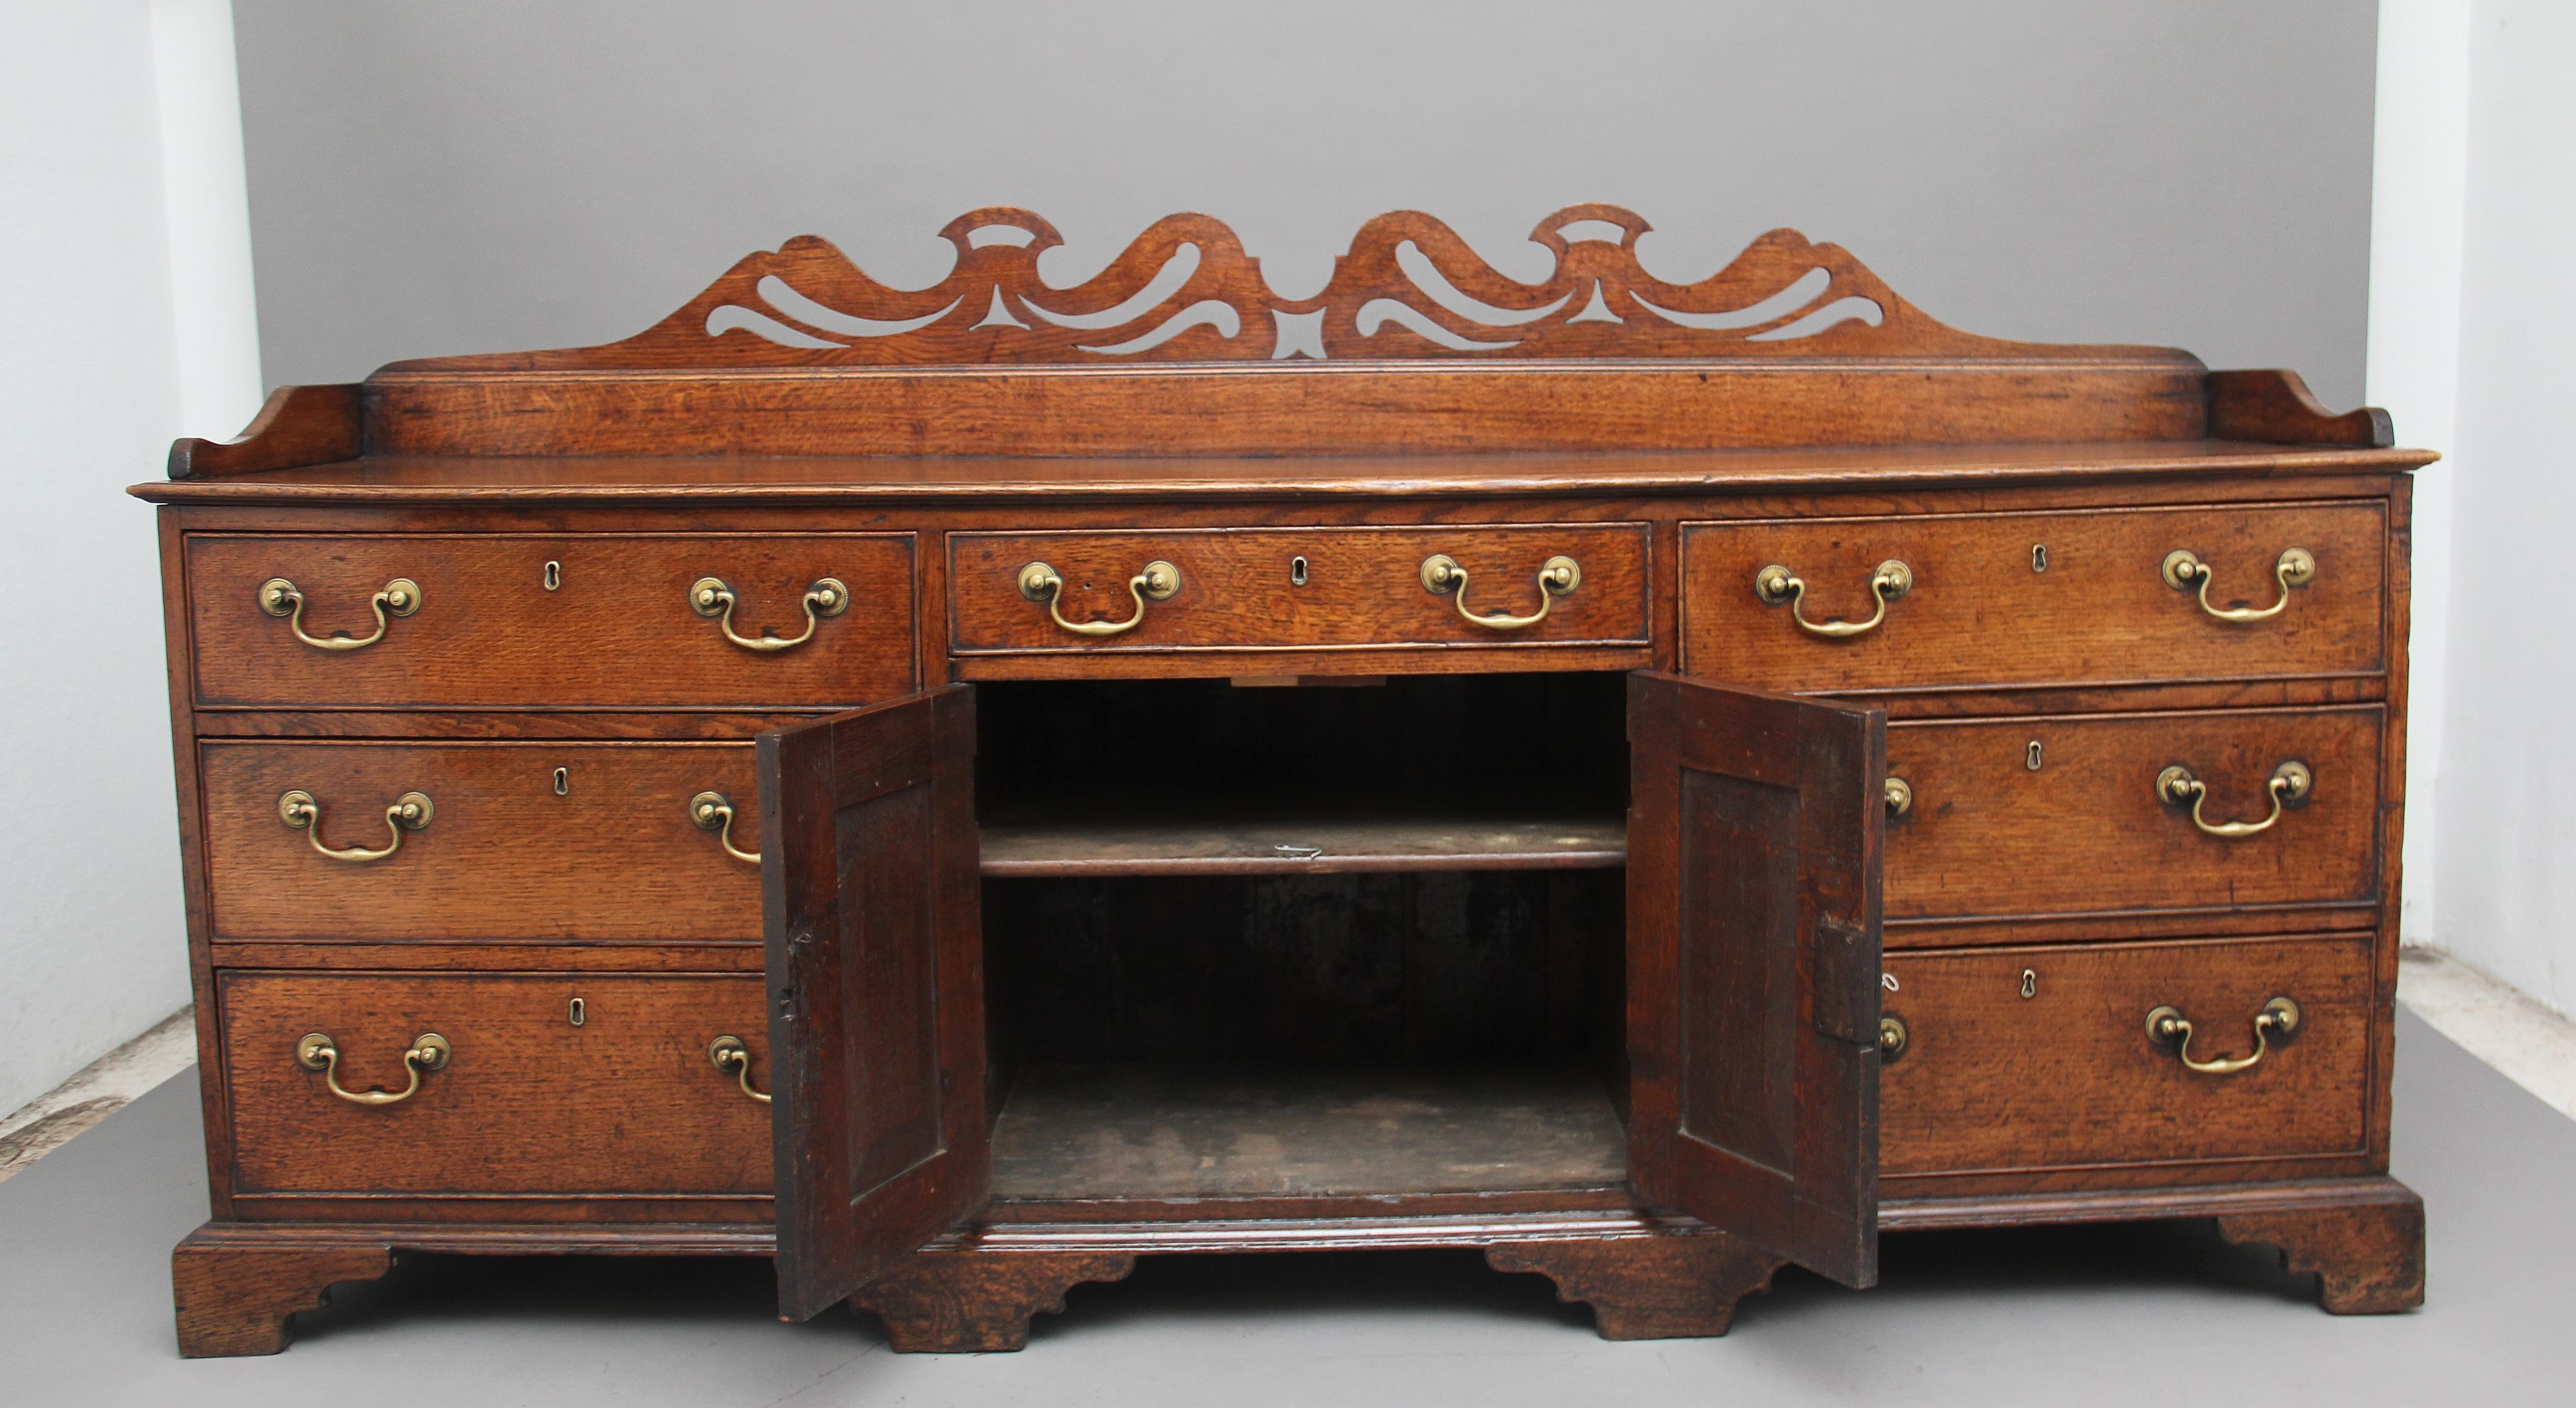 A very good quality 18th century oak dresser, the top having a three quarter gallery with a pierced frieze above a selection of seven graduated oak lined drawers with brass swan neck handles, the centre of the dresser having twin panelled cupboard